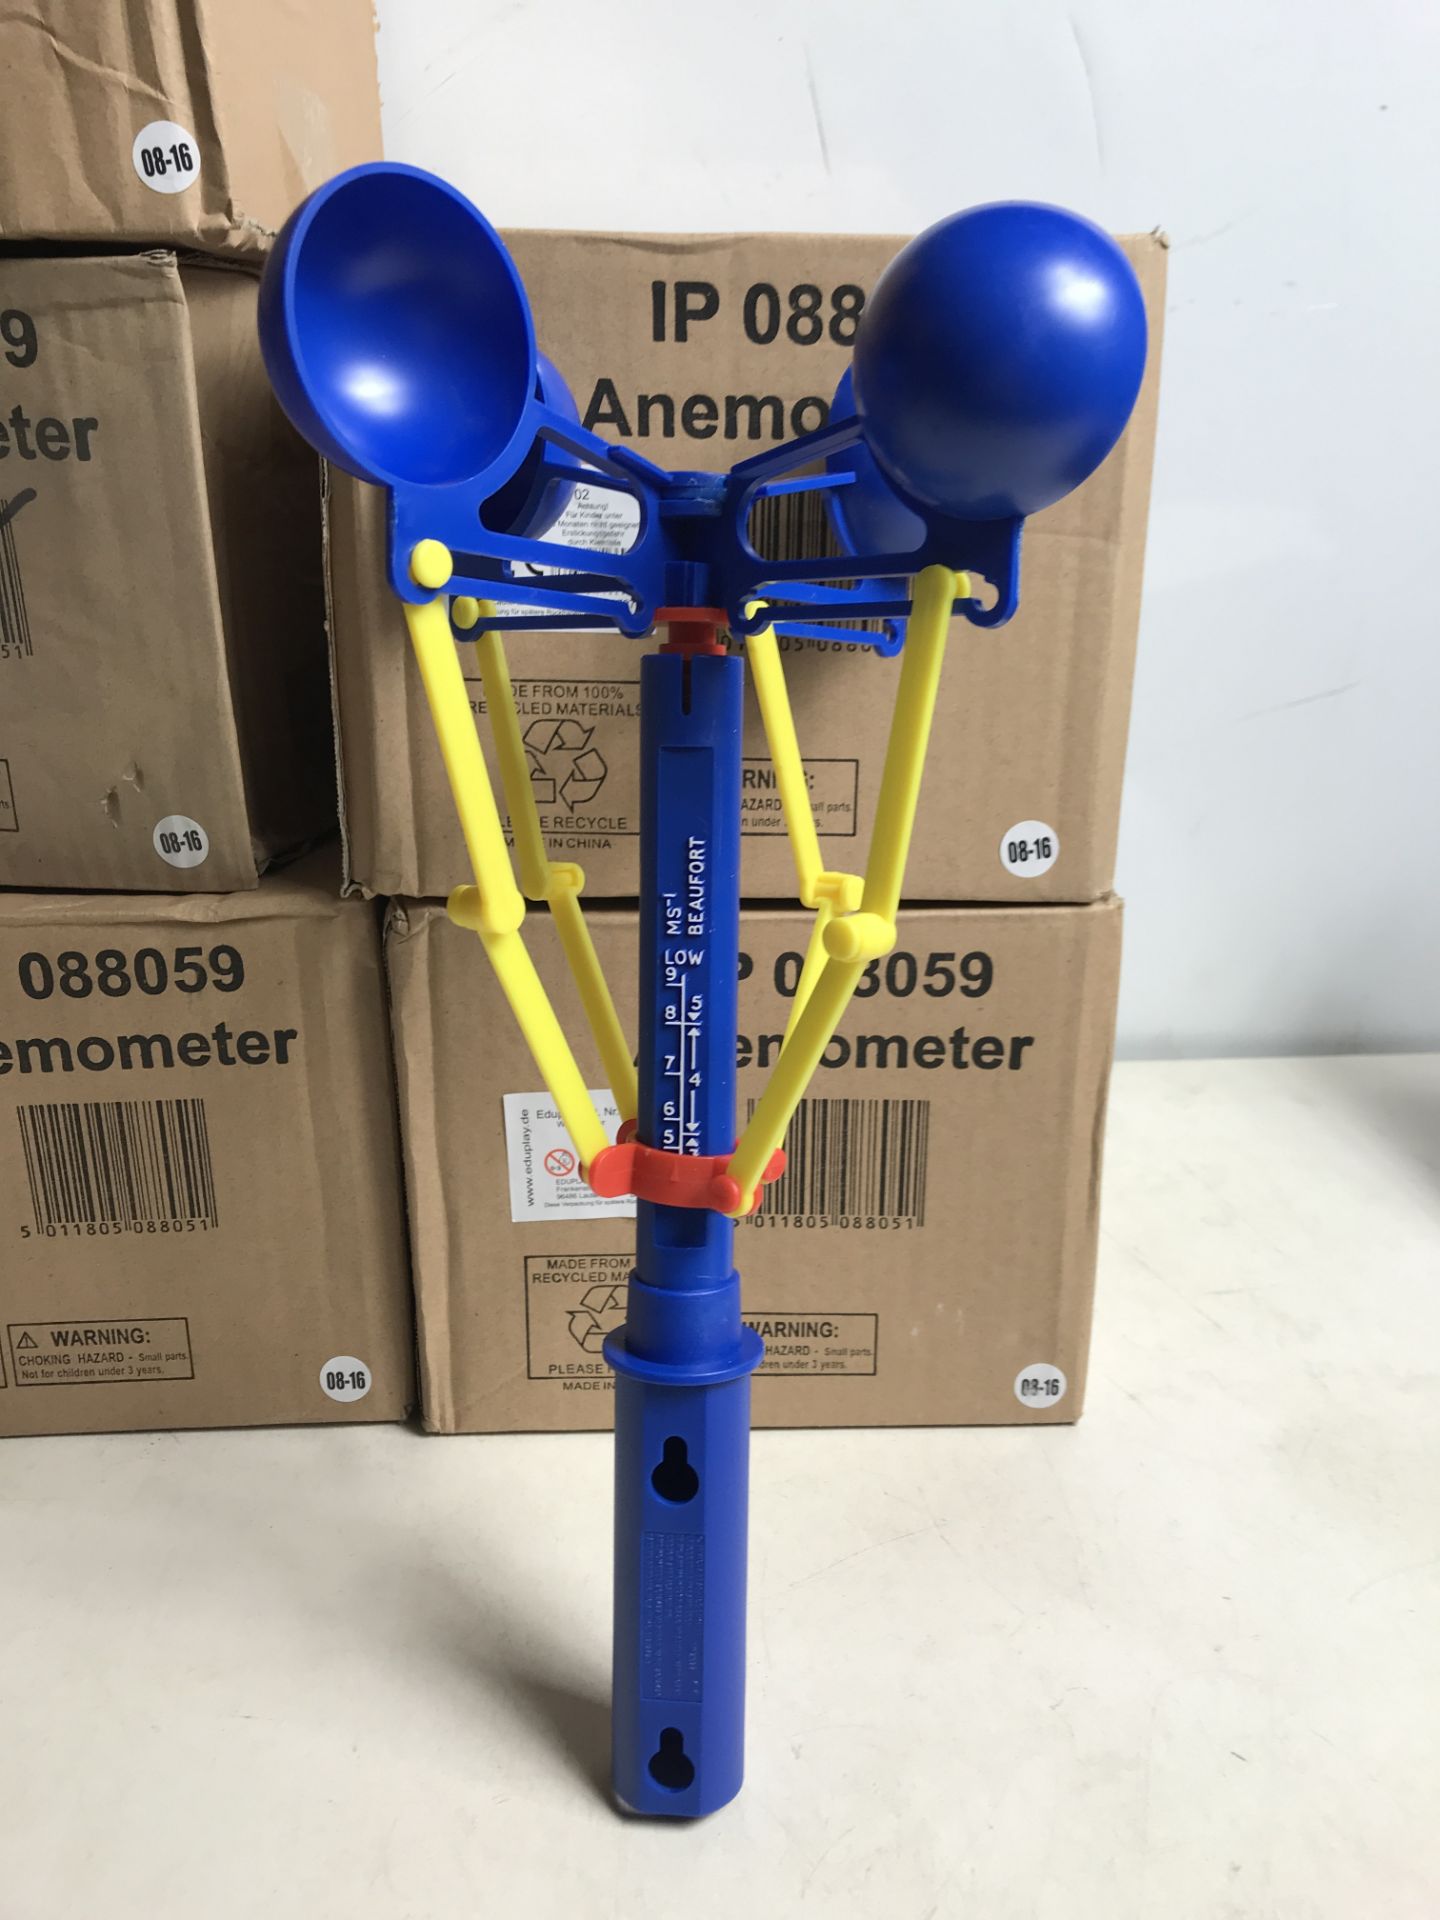 6 x Anemometer Wind Speed Measuring Toys - Image 2 of 2